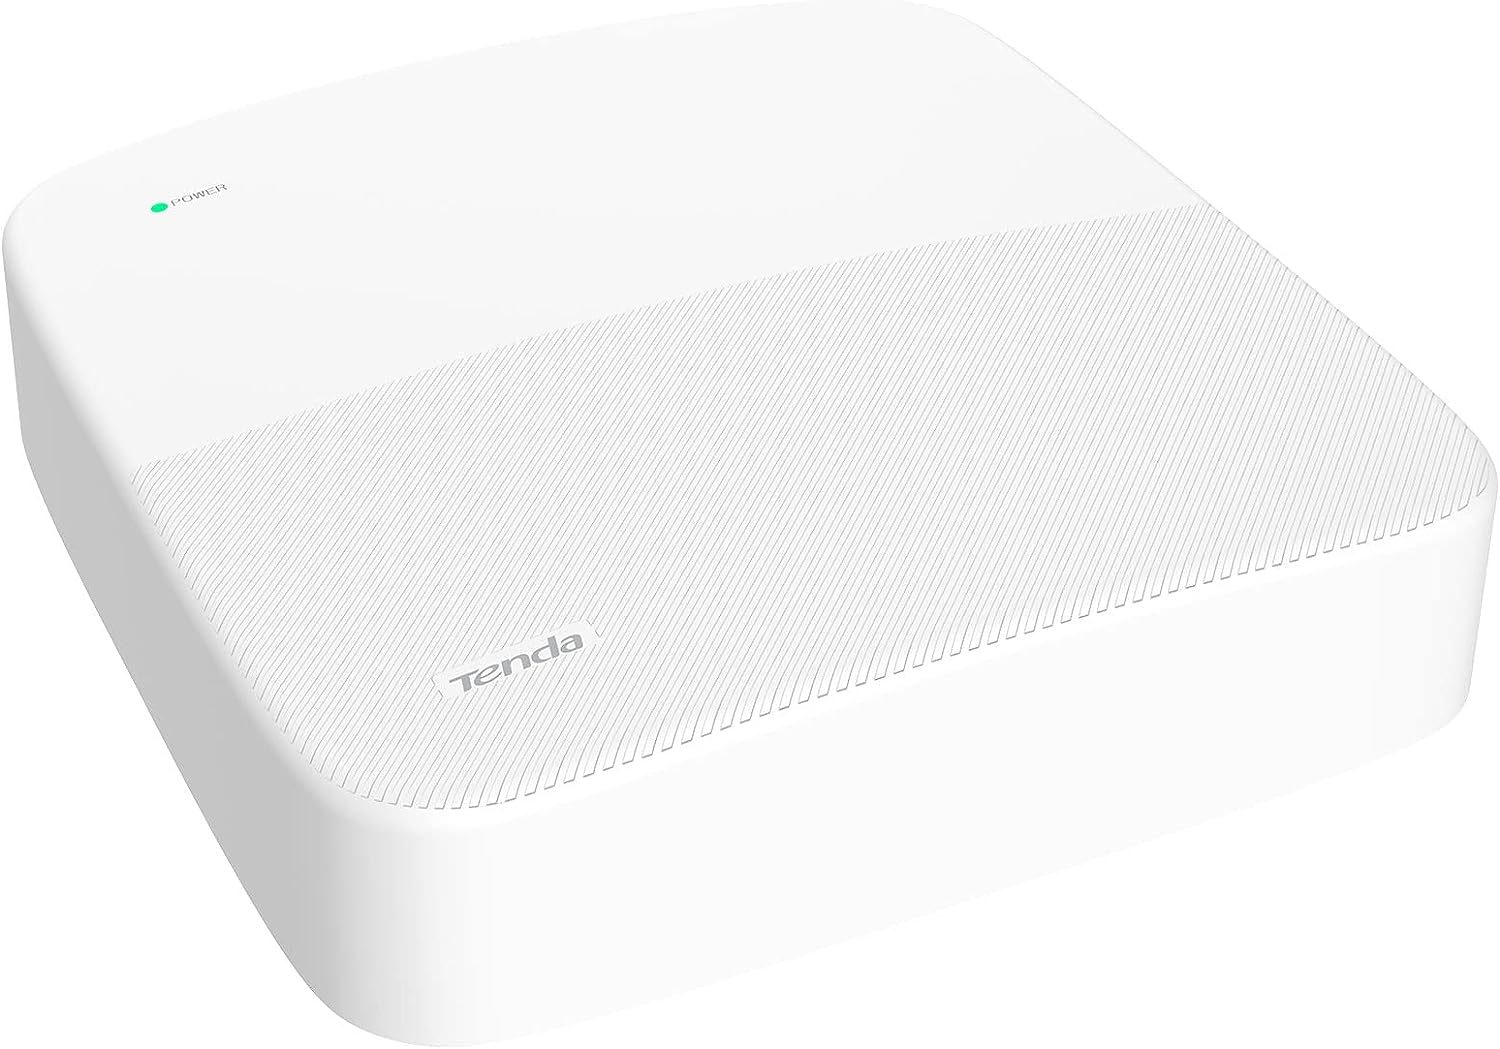 Tenda NVR N3L-16H 4K 16CH Network Video Recorder for Home Security Camera System, 1080p/3MP/4MP/5MP/8MP ONVIF NVR Recorders, H.265 Surveillance Video Recorders, Supports up to 10TB HDD (Not Included)